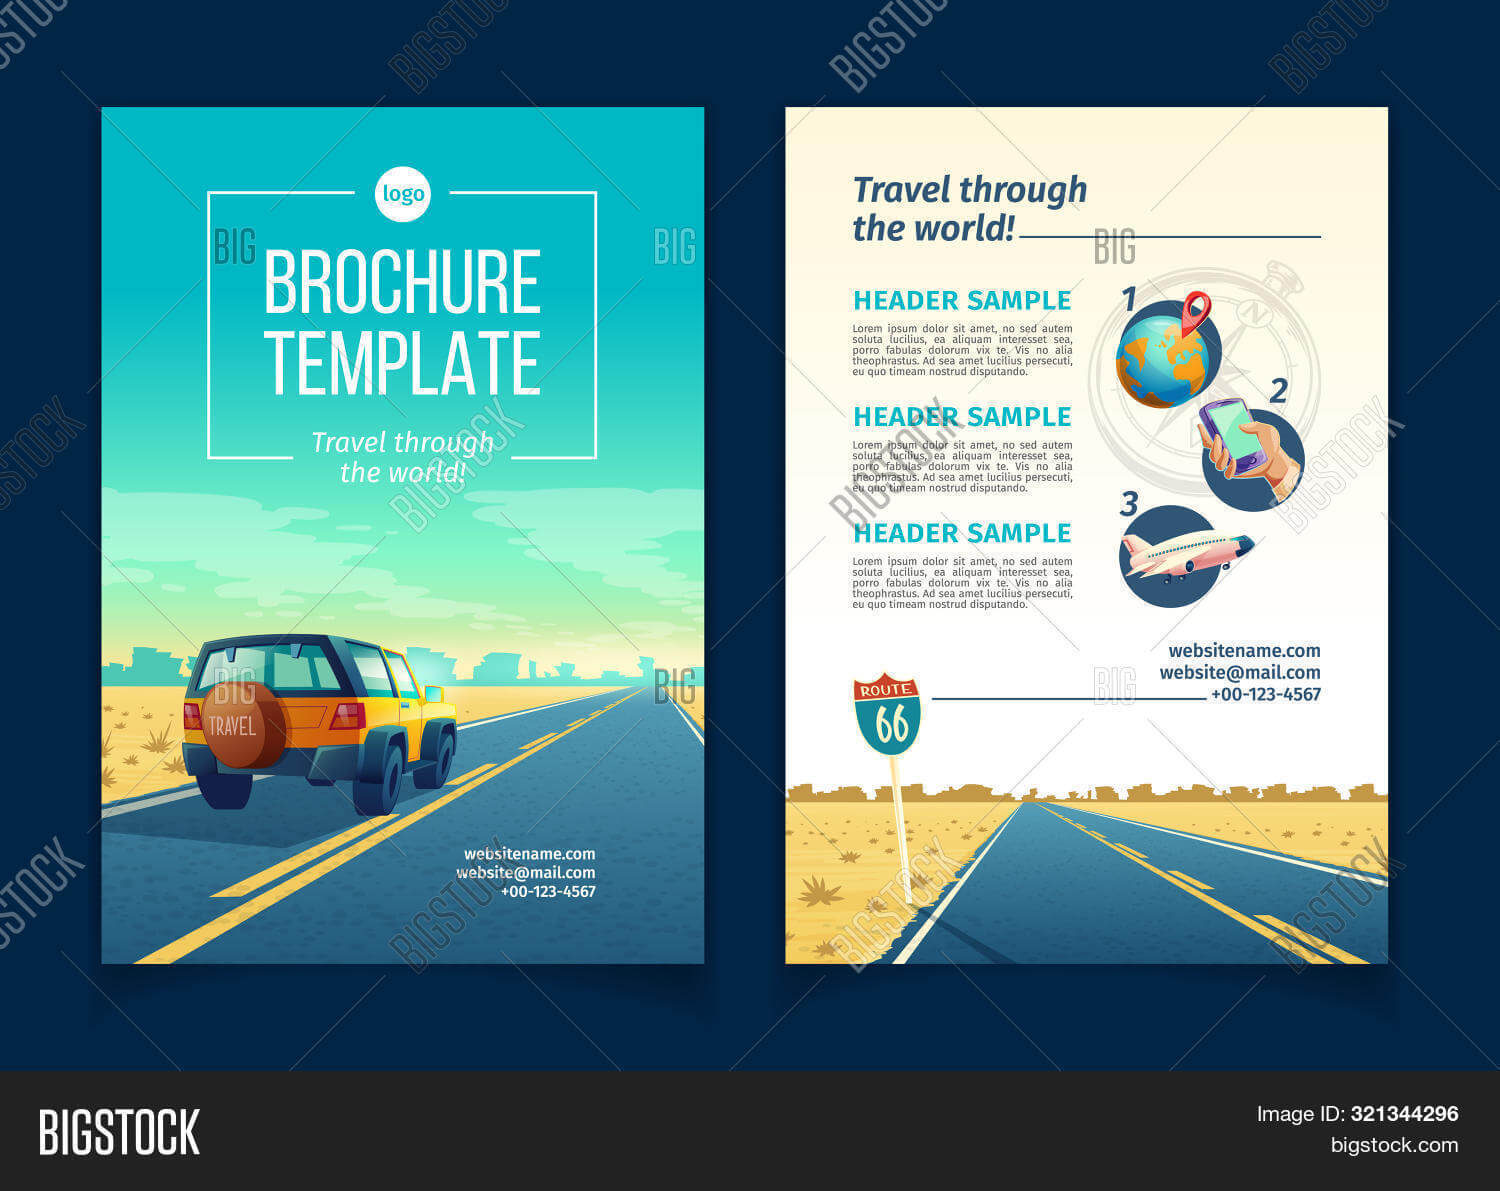 Brochure Template Image & Photo (Free Trial) | Bigstock Pertaining To Travel And Tourism Brochure Templates Free